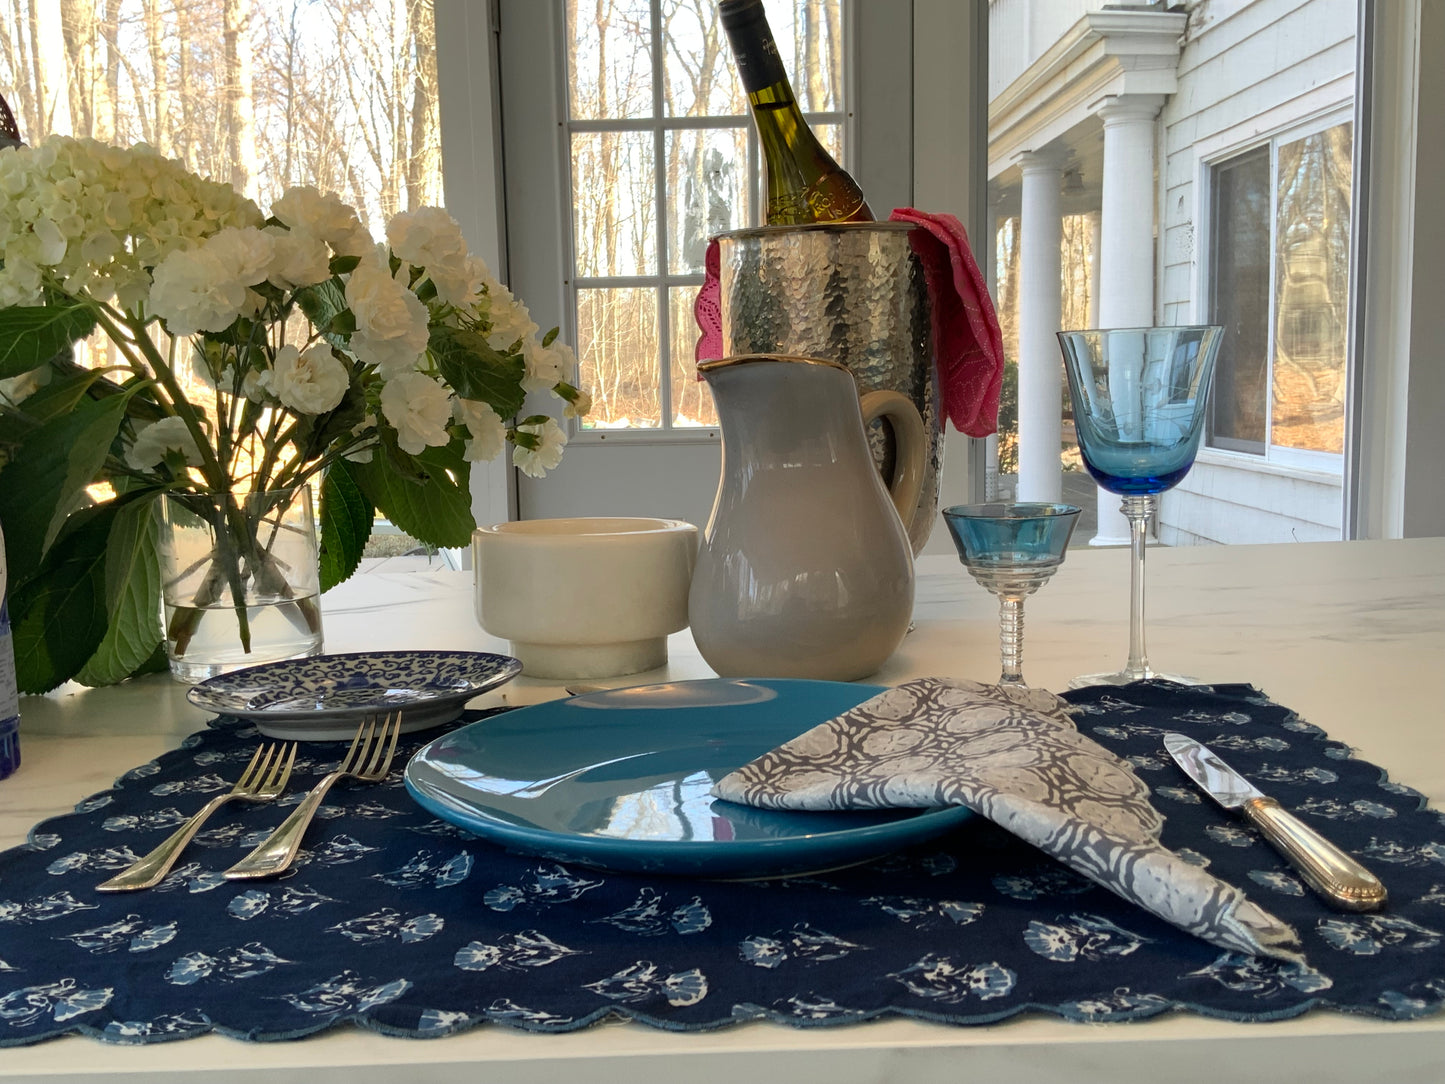 Blue Block-print Cocktail Napkins with Scalloped Edges - DharBazaar